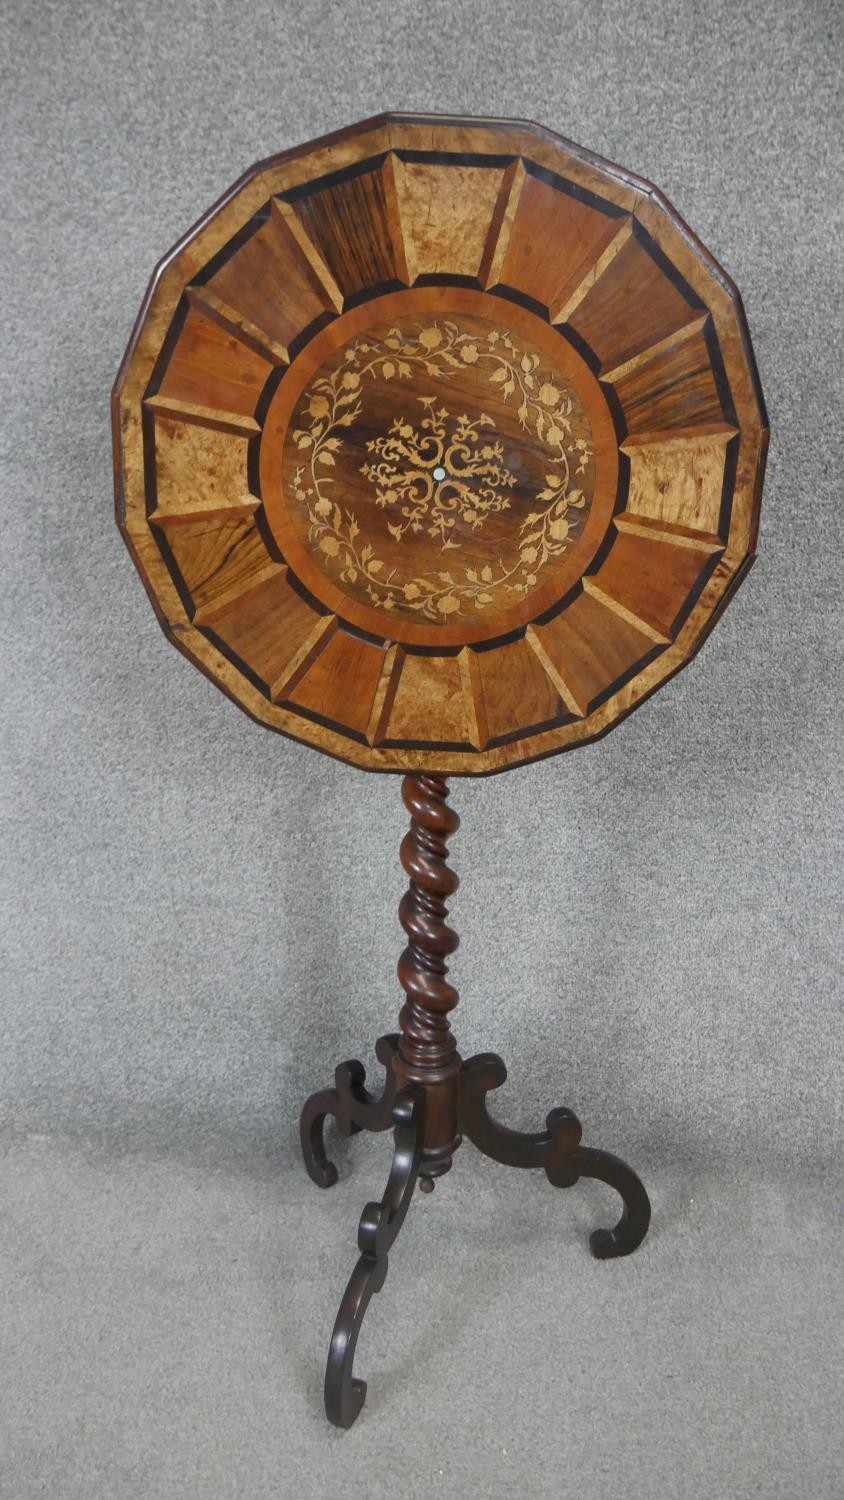 A 19th century parquetry inlaid specimen table with central floral marquetry section raised on